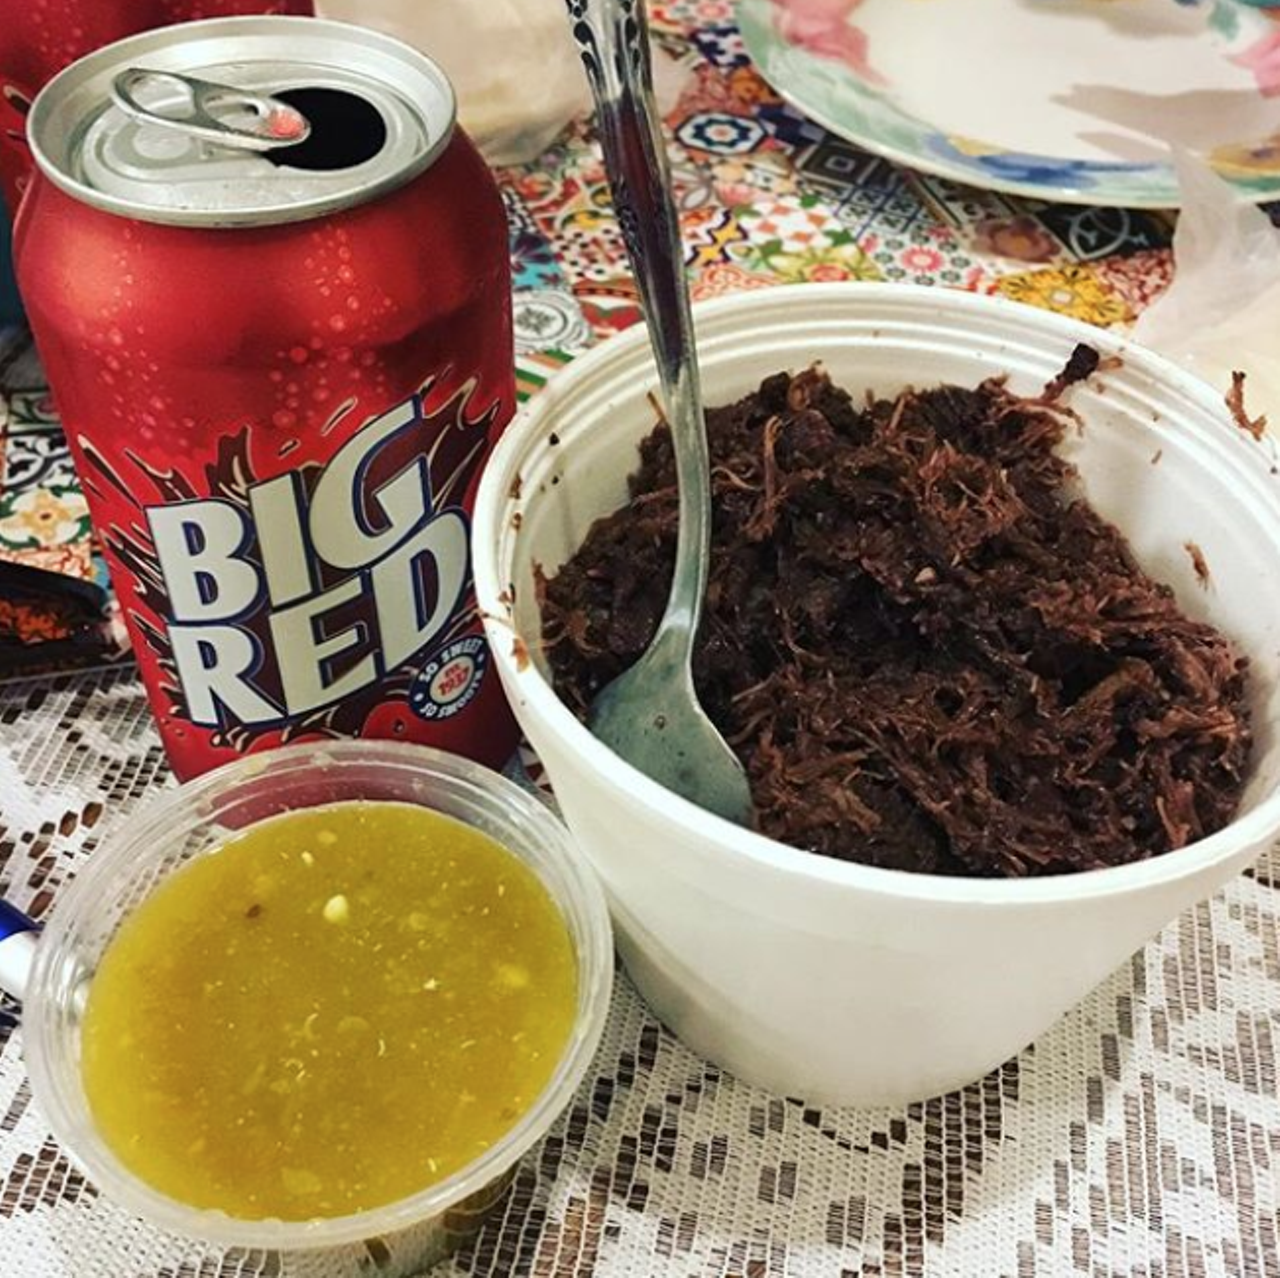 Barbacoa and Big Red
Need a couple's costume? Dress one person up a as styrofoam container of barbacoa — use shreds of brown carpet to stick out the top — and the other as a bottle of big red. Puro San Anto, baby.
Photo via Instagram / alanisgood